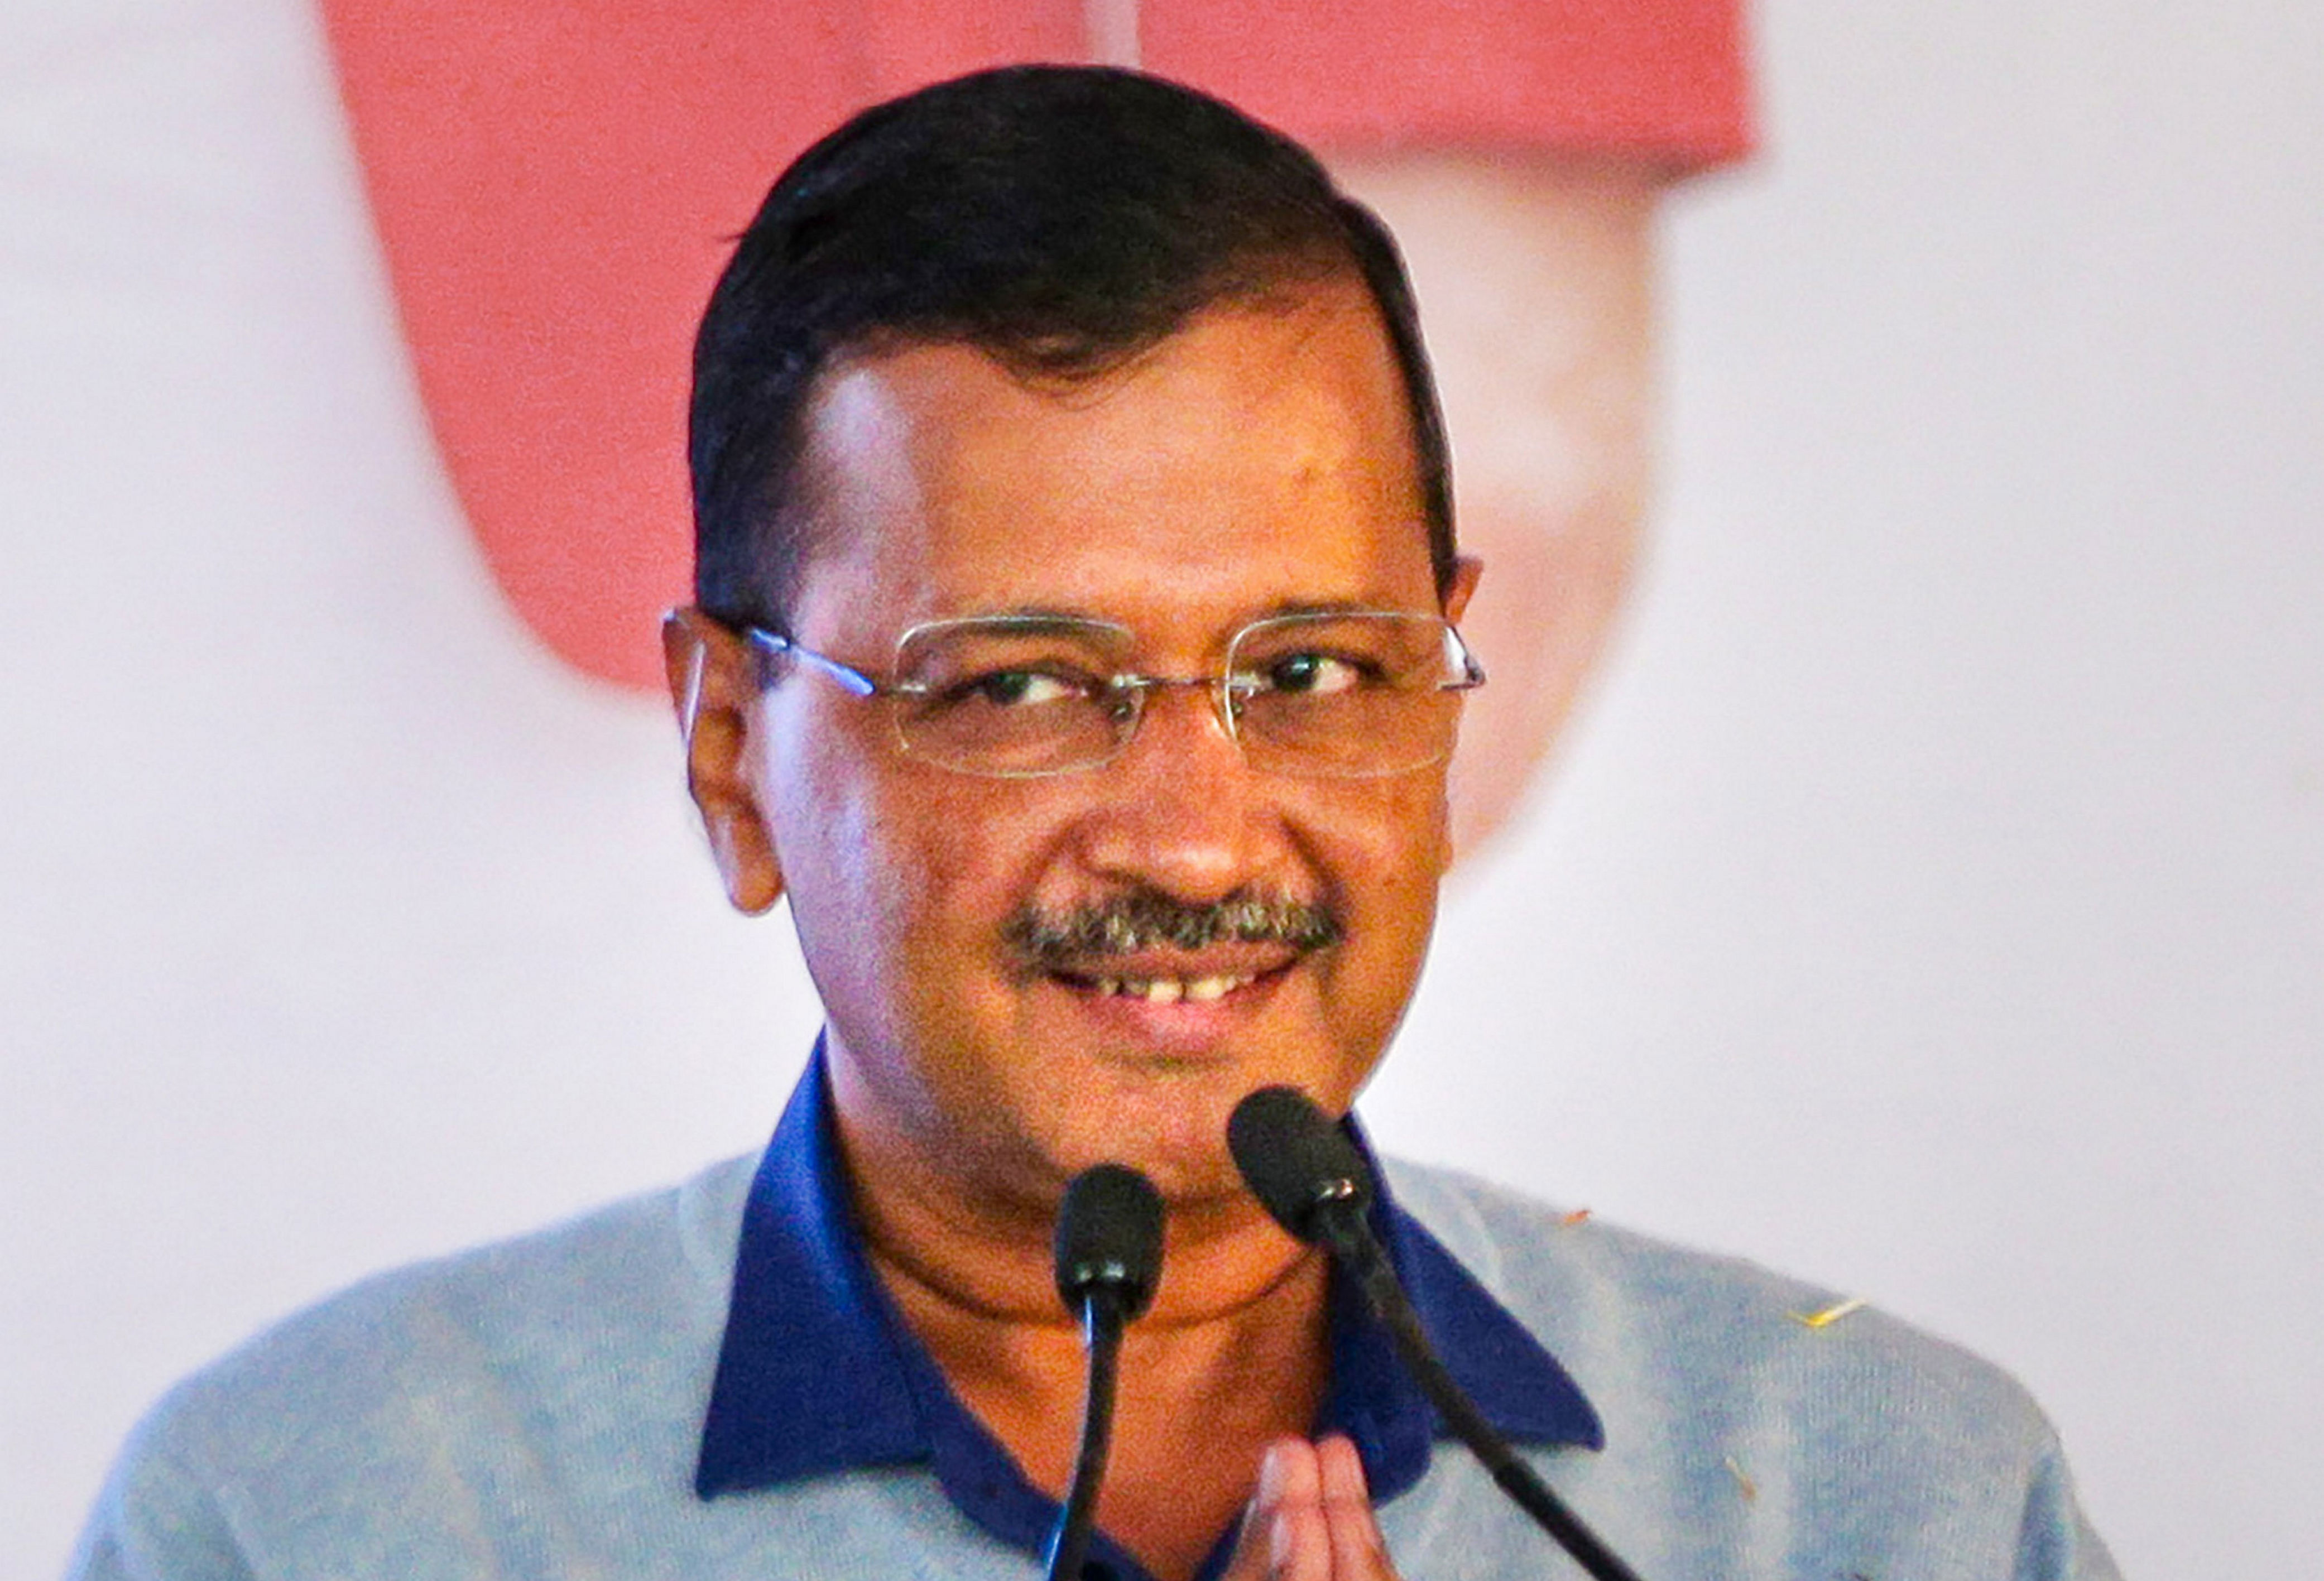 will open as many schools as no. of summonses sent to me; education will remove poverty: kejriwal